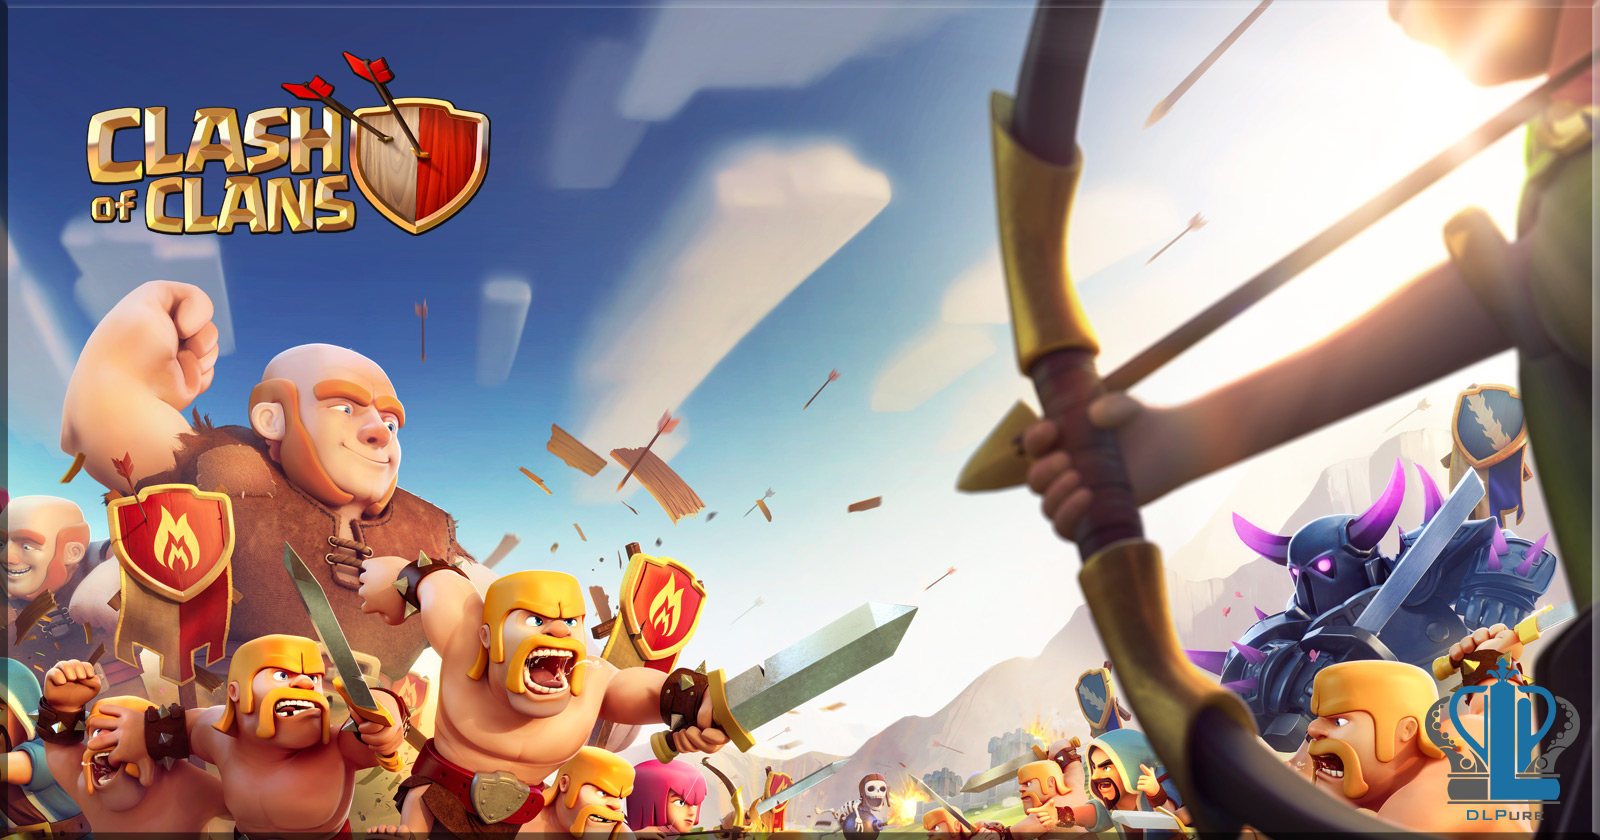 Clash of clans Cover